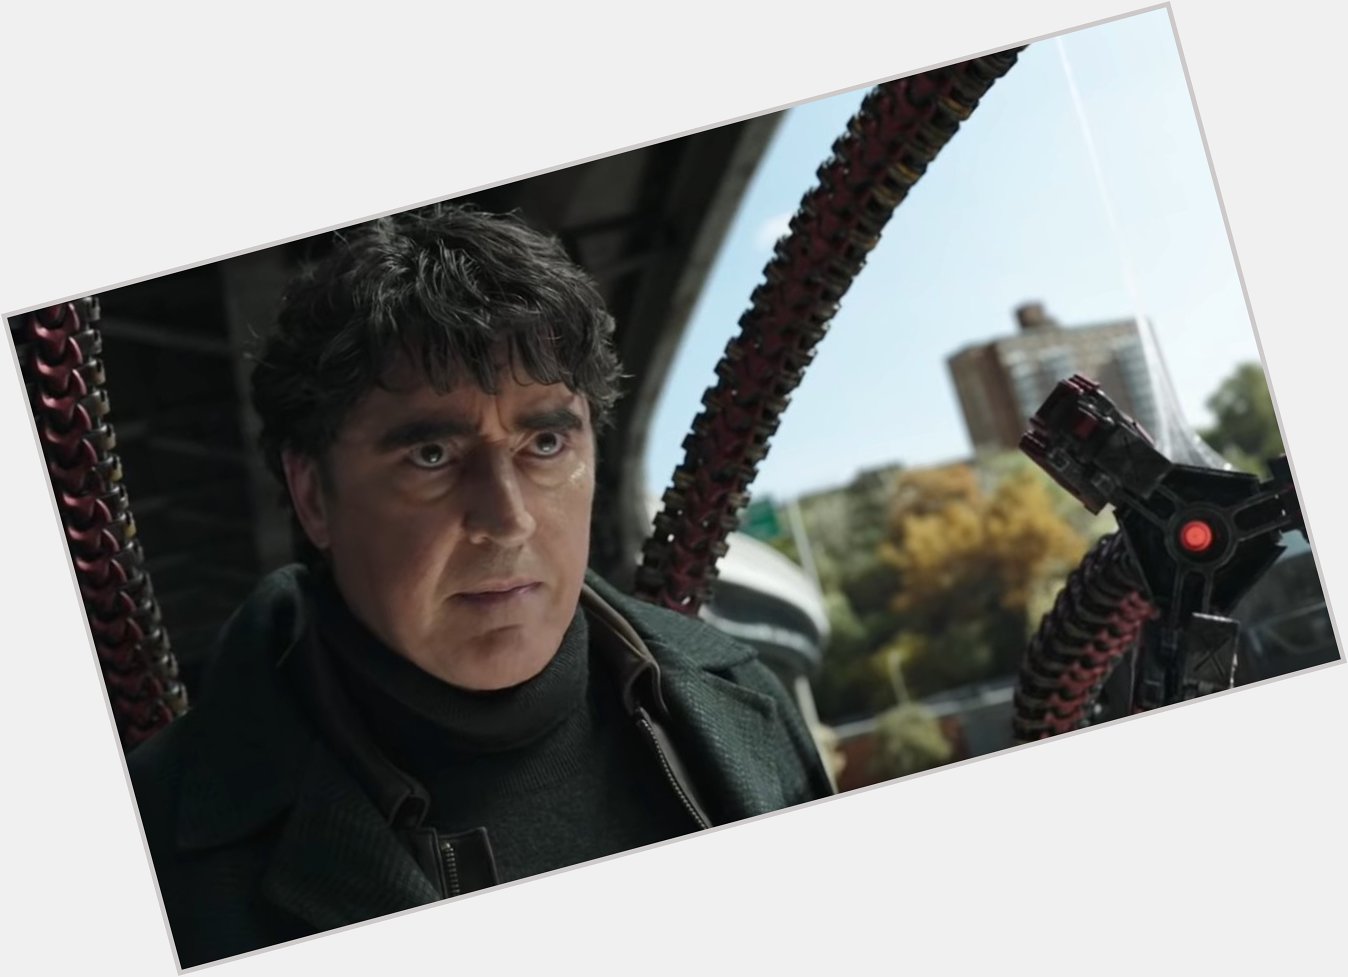 Indestructible tentacles come in handy when handing out slices of cake. Happy birthday, Alfred Molina! 